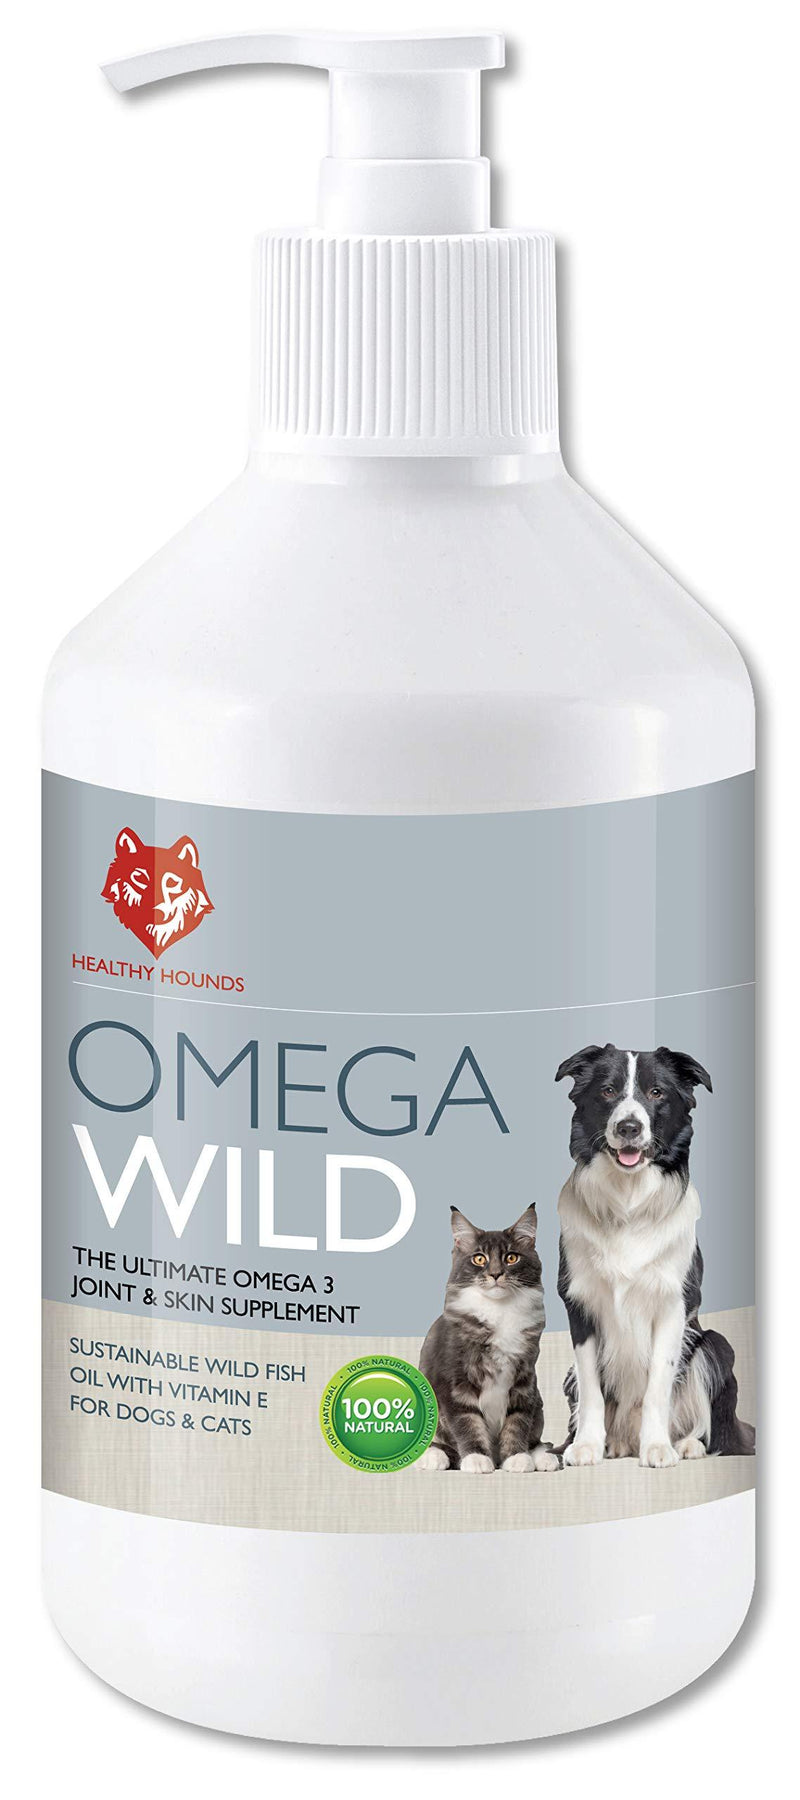 Wild Fish Oil for Dogs OmegaWild 500ml | Alternative to Salmon Oil with Higher Omega 3 | Pets Best For Joints, Skin, Coat, Heart | Premium Fish Oil Supplements for Dogs Essential Vitamin E | 500 ml (Pack of 1) - PawsPlanet Australia